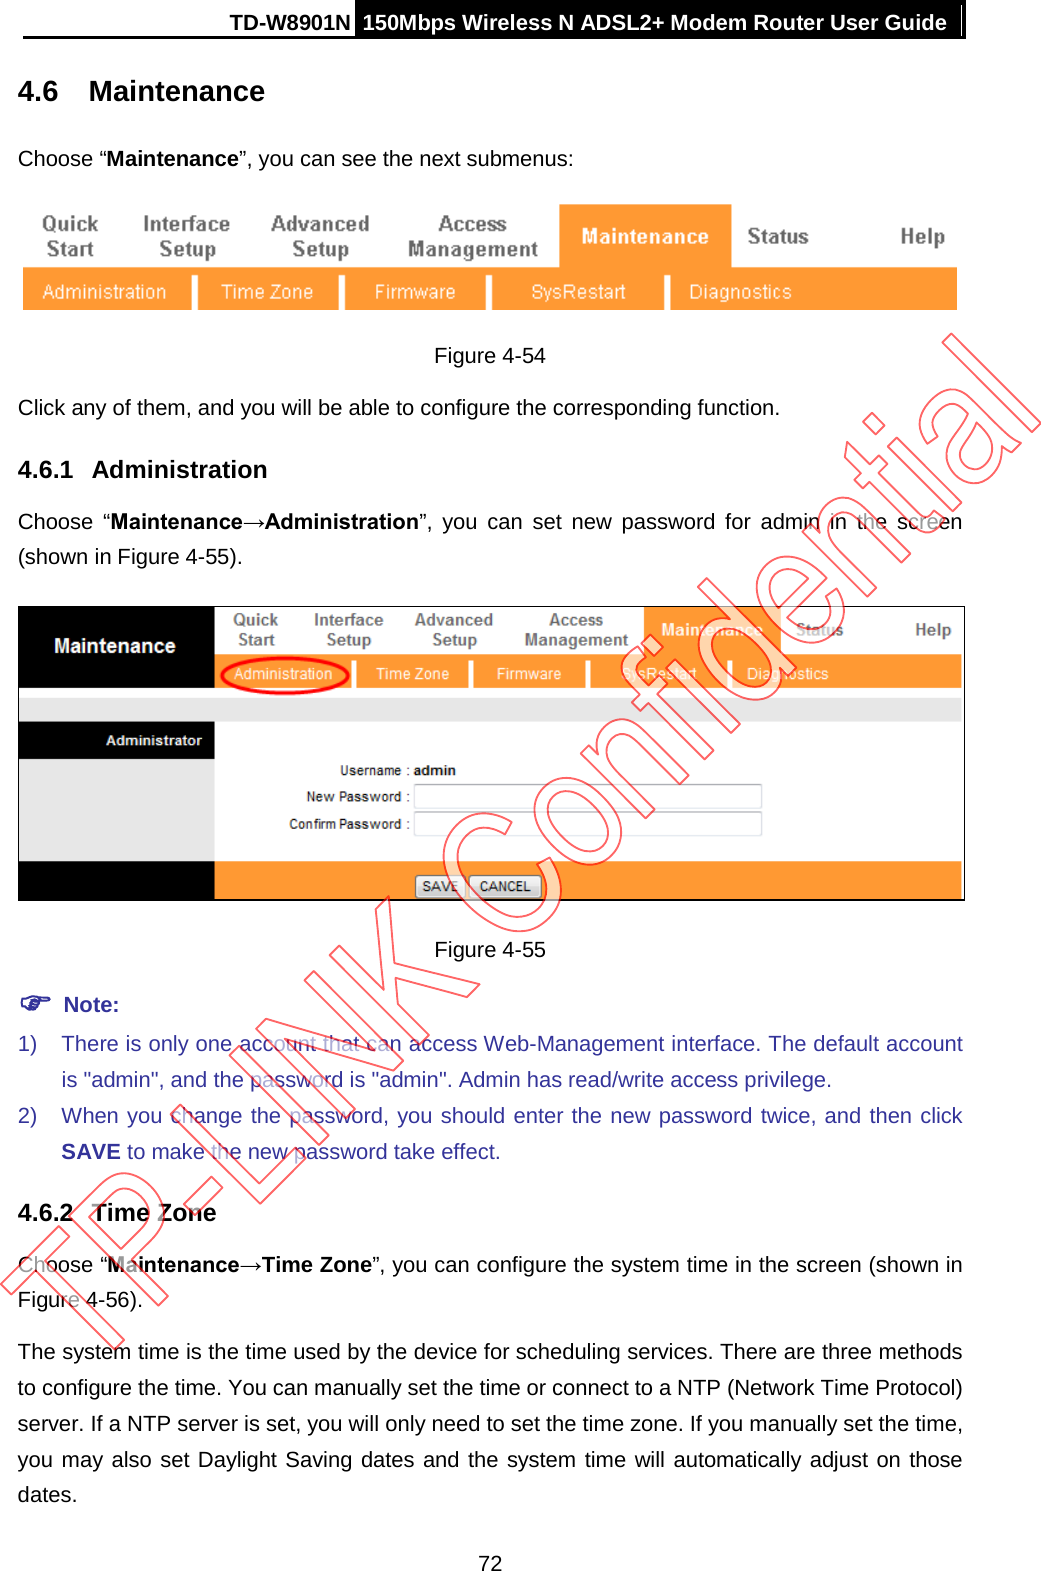 TD-W8901N 150Mbps Wireless N ADSL2+ Modem Router User Guide  4.6 Maintenance Choose “Maintenance”, you can see the next submenus:  Figure 4-54 Click any of them, and you will be able to configure the corresponding function. 4.6.1 Administration Choose “Maintenance→Administration”, you can set new password for admin in the screen (shown in Figure 4-55).  Figure 4-55  Note: 1) There is only one account that can access Web-Management interface. The default account is &quot;admin&quot;, and the password is &quot;admin&quot;. Admin has read/write access privilege. 2) When you change the password, you should enter the new password twice, and then click SAVE to make the new password take effect. 4.6.2  Time Zone Choose “Maintenance→Time Zone”, you can configure the system time in the screen (shown in Figure 4-56). The system time is the time used by the device for scheduling services. There are three methods to configure the time. You can manually set the time or connect to a NTP (Network Time Protocol) server. If a NTP server is set, you will only need to set the time zone. If you manually set the time, you may also set Daylight Saving dates and the system time will automatically adjust on those dates. 72 